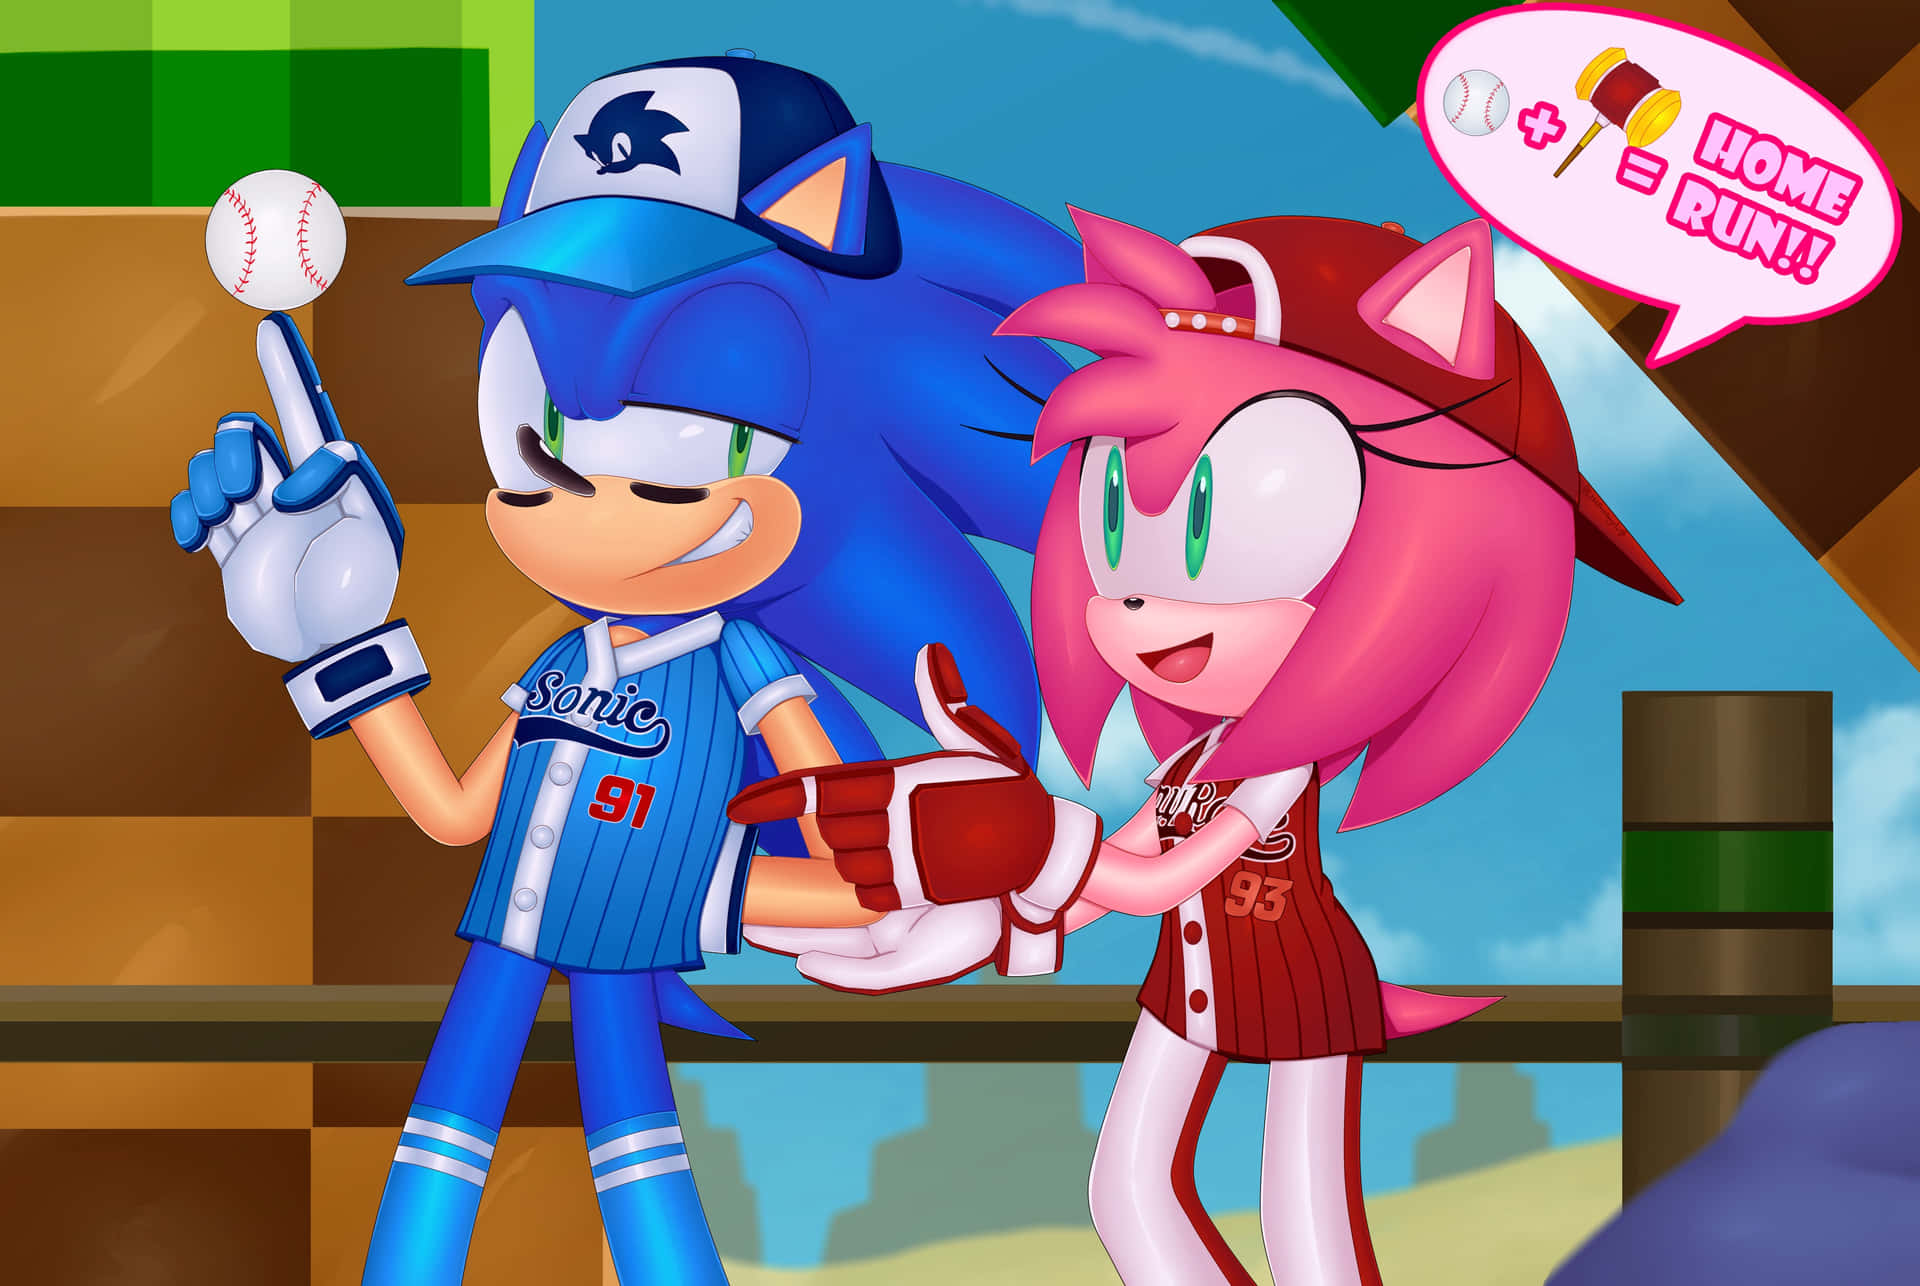 Sonic and Amy together in an adventurous journey Wallpaper